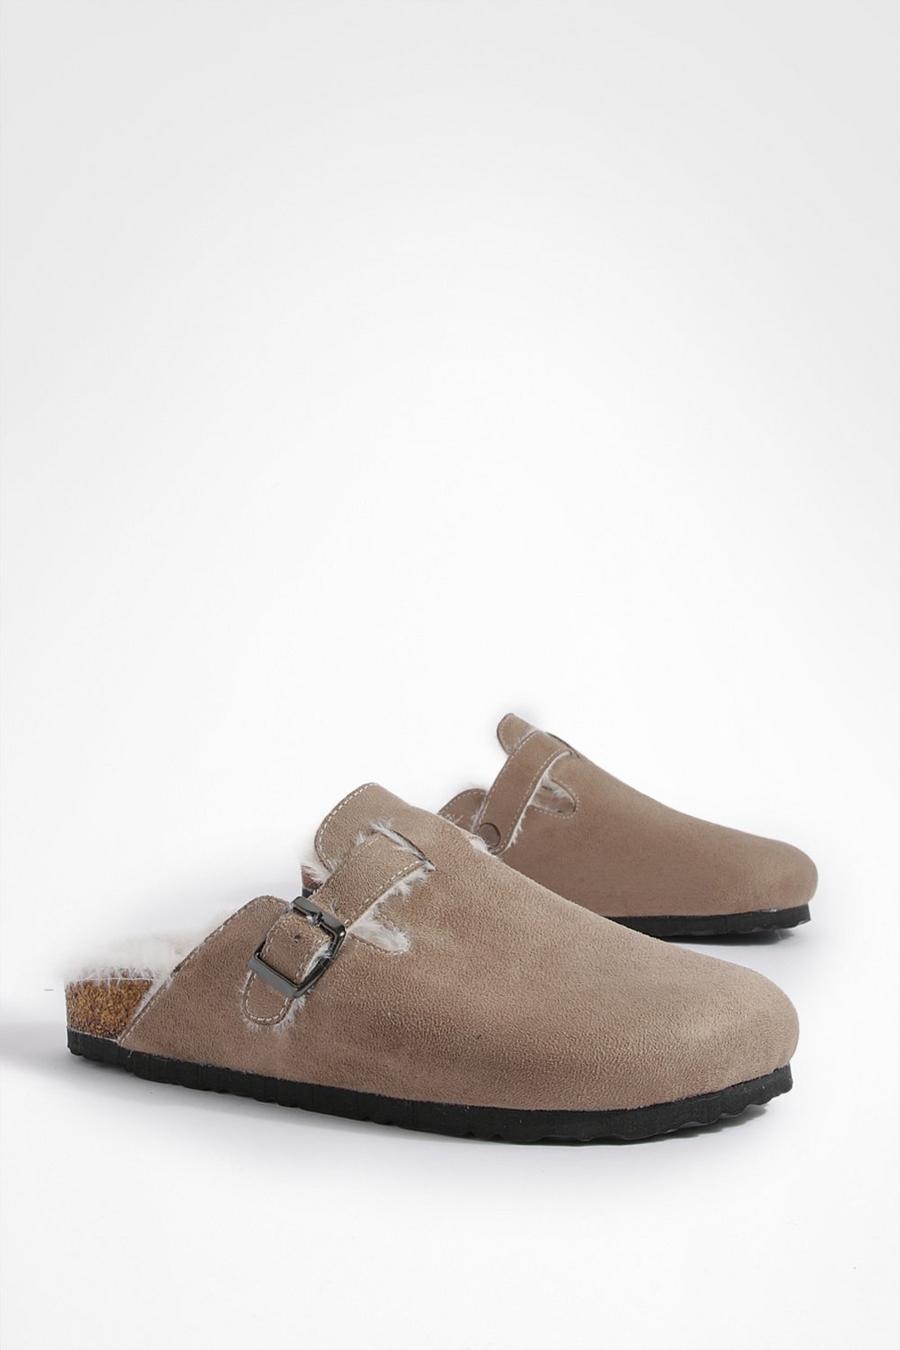 Taupe Clogs tofflor med bred passform